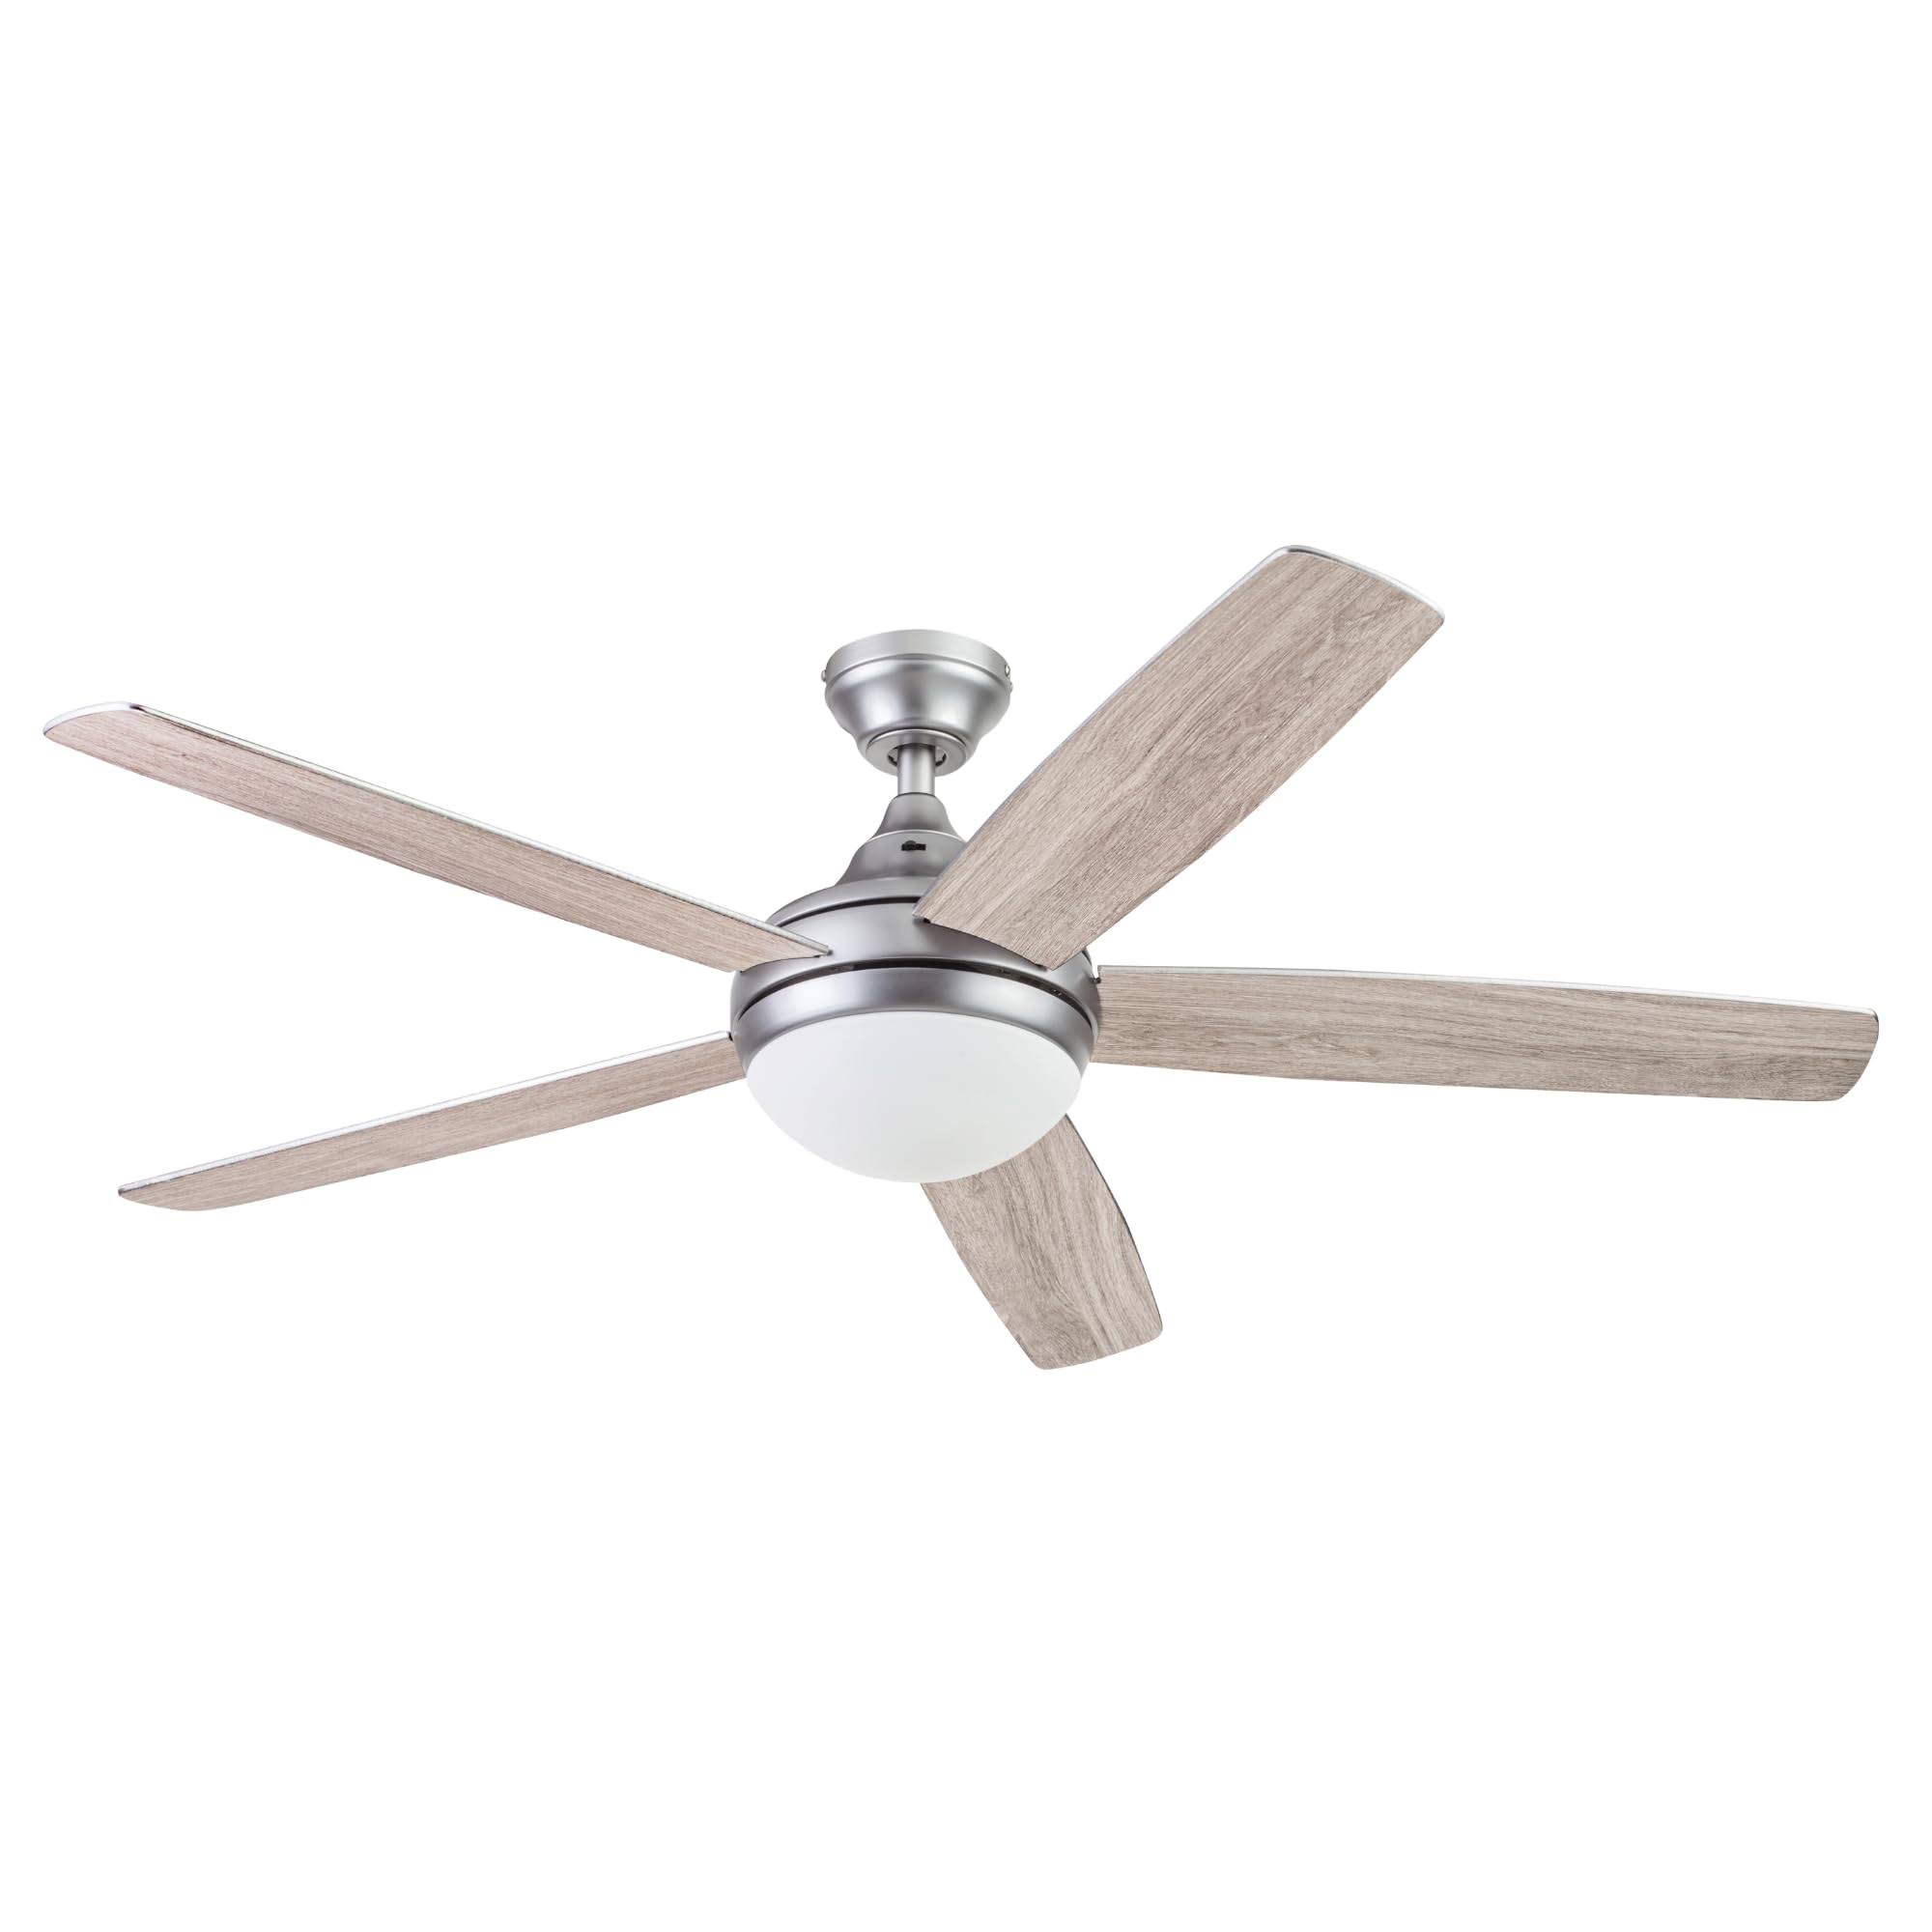 Prominence Home 51630-01 Ashby Ceiling Fan, 52, Pewter